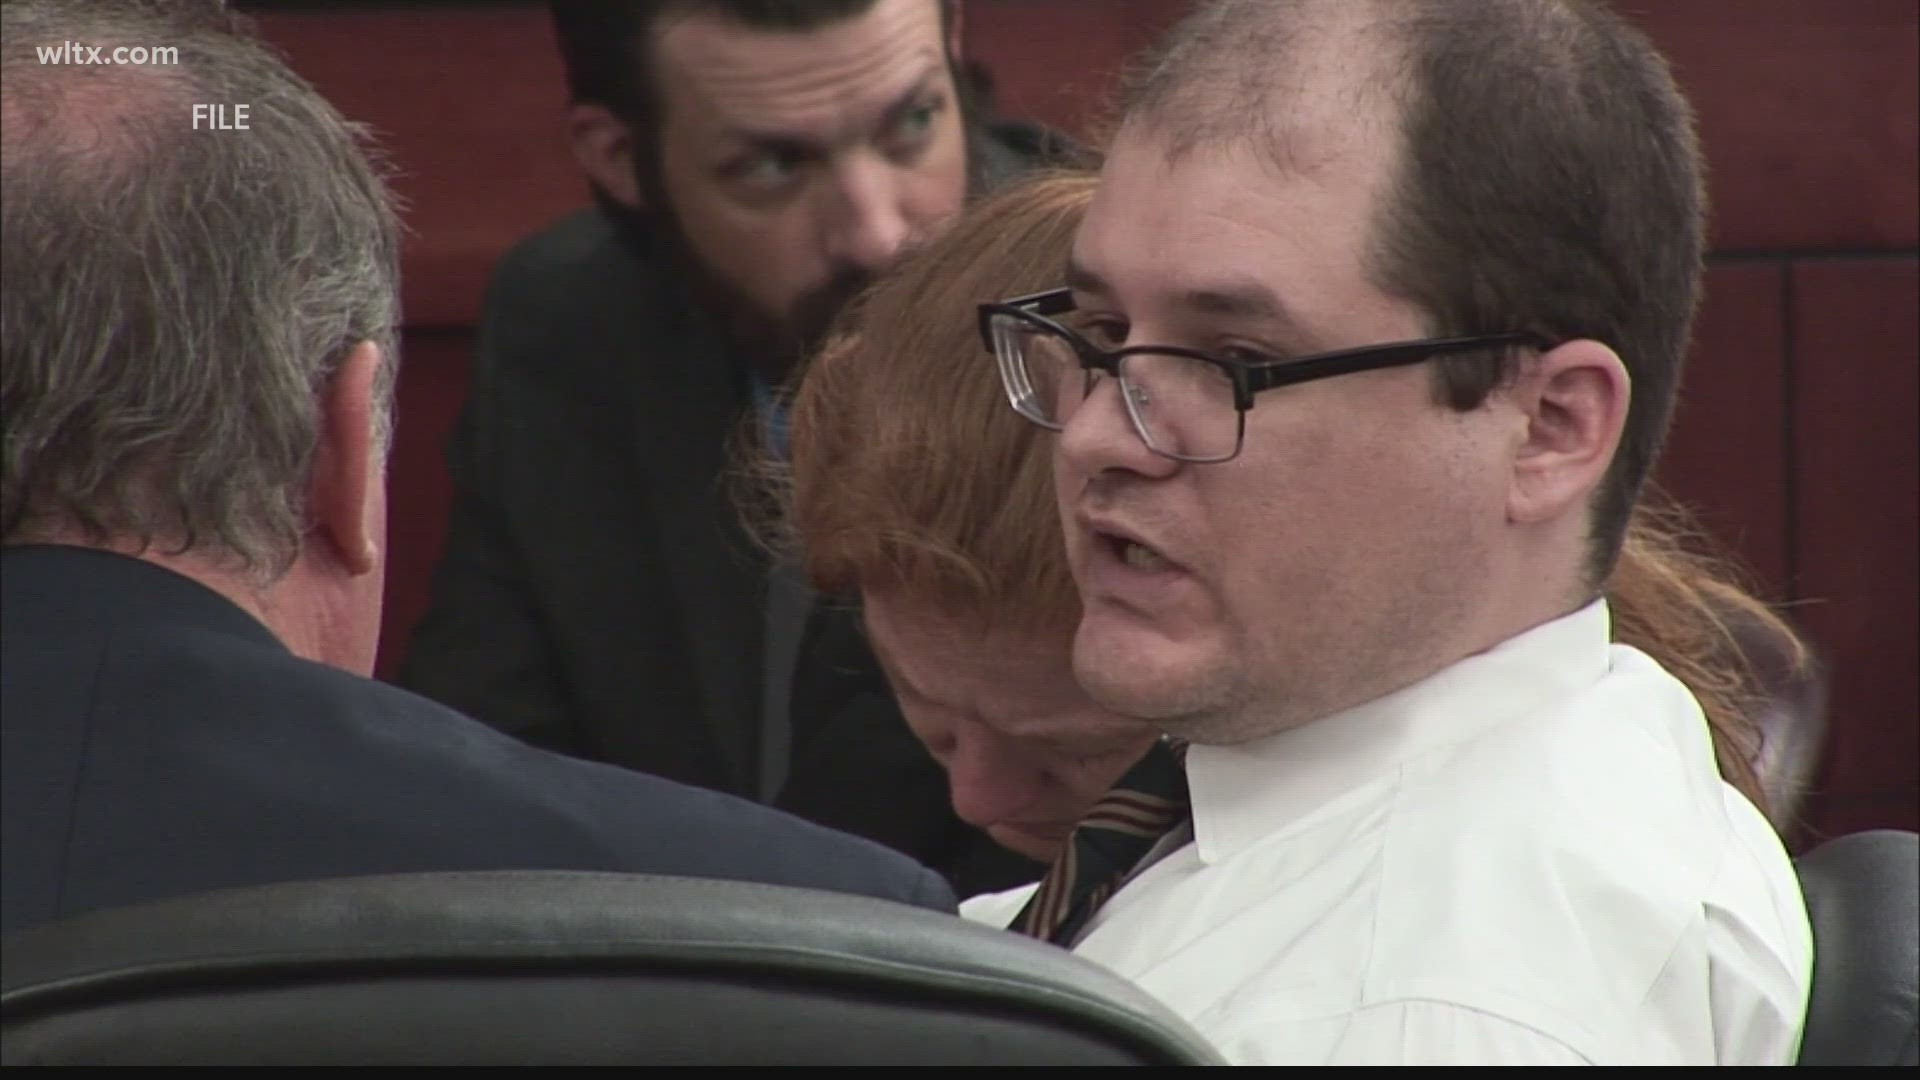 Timothy Jones Jr. was charged guilty in the 2014 case and received the death penalty.